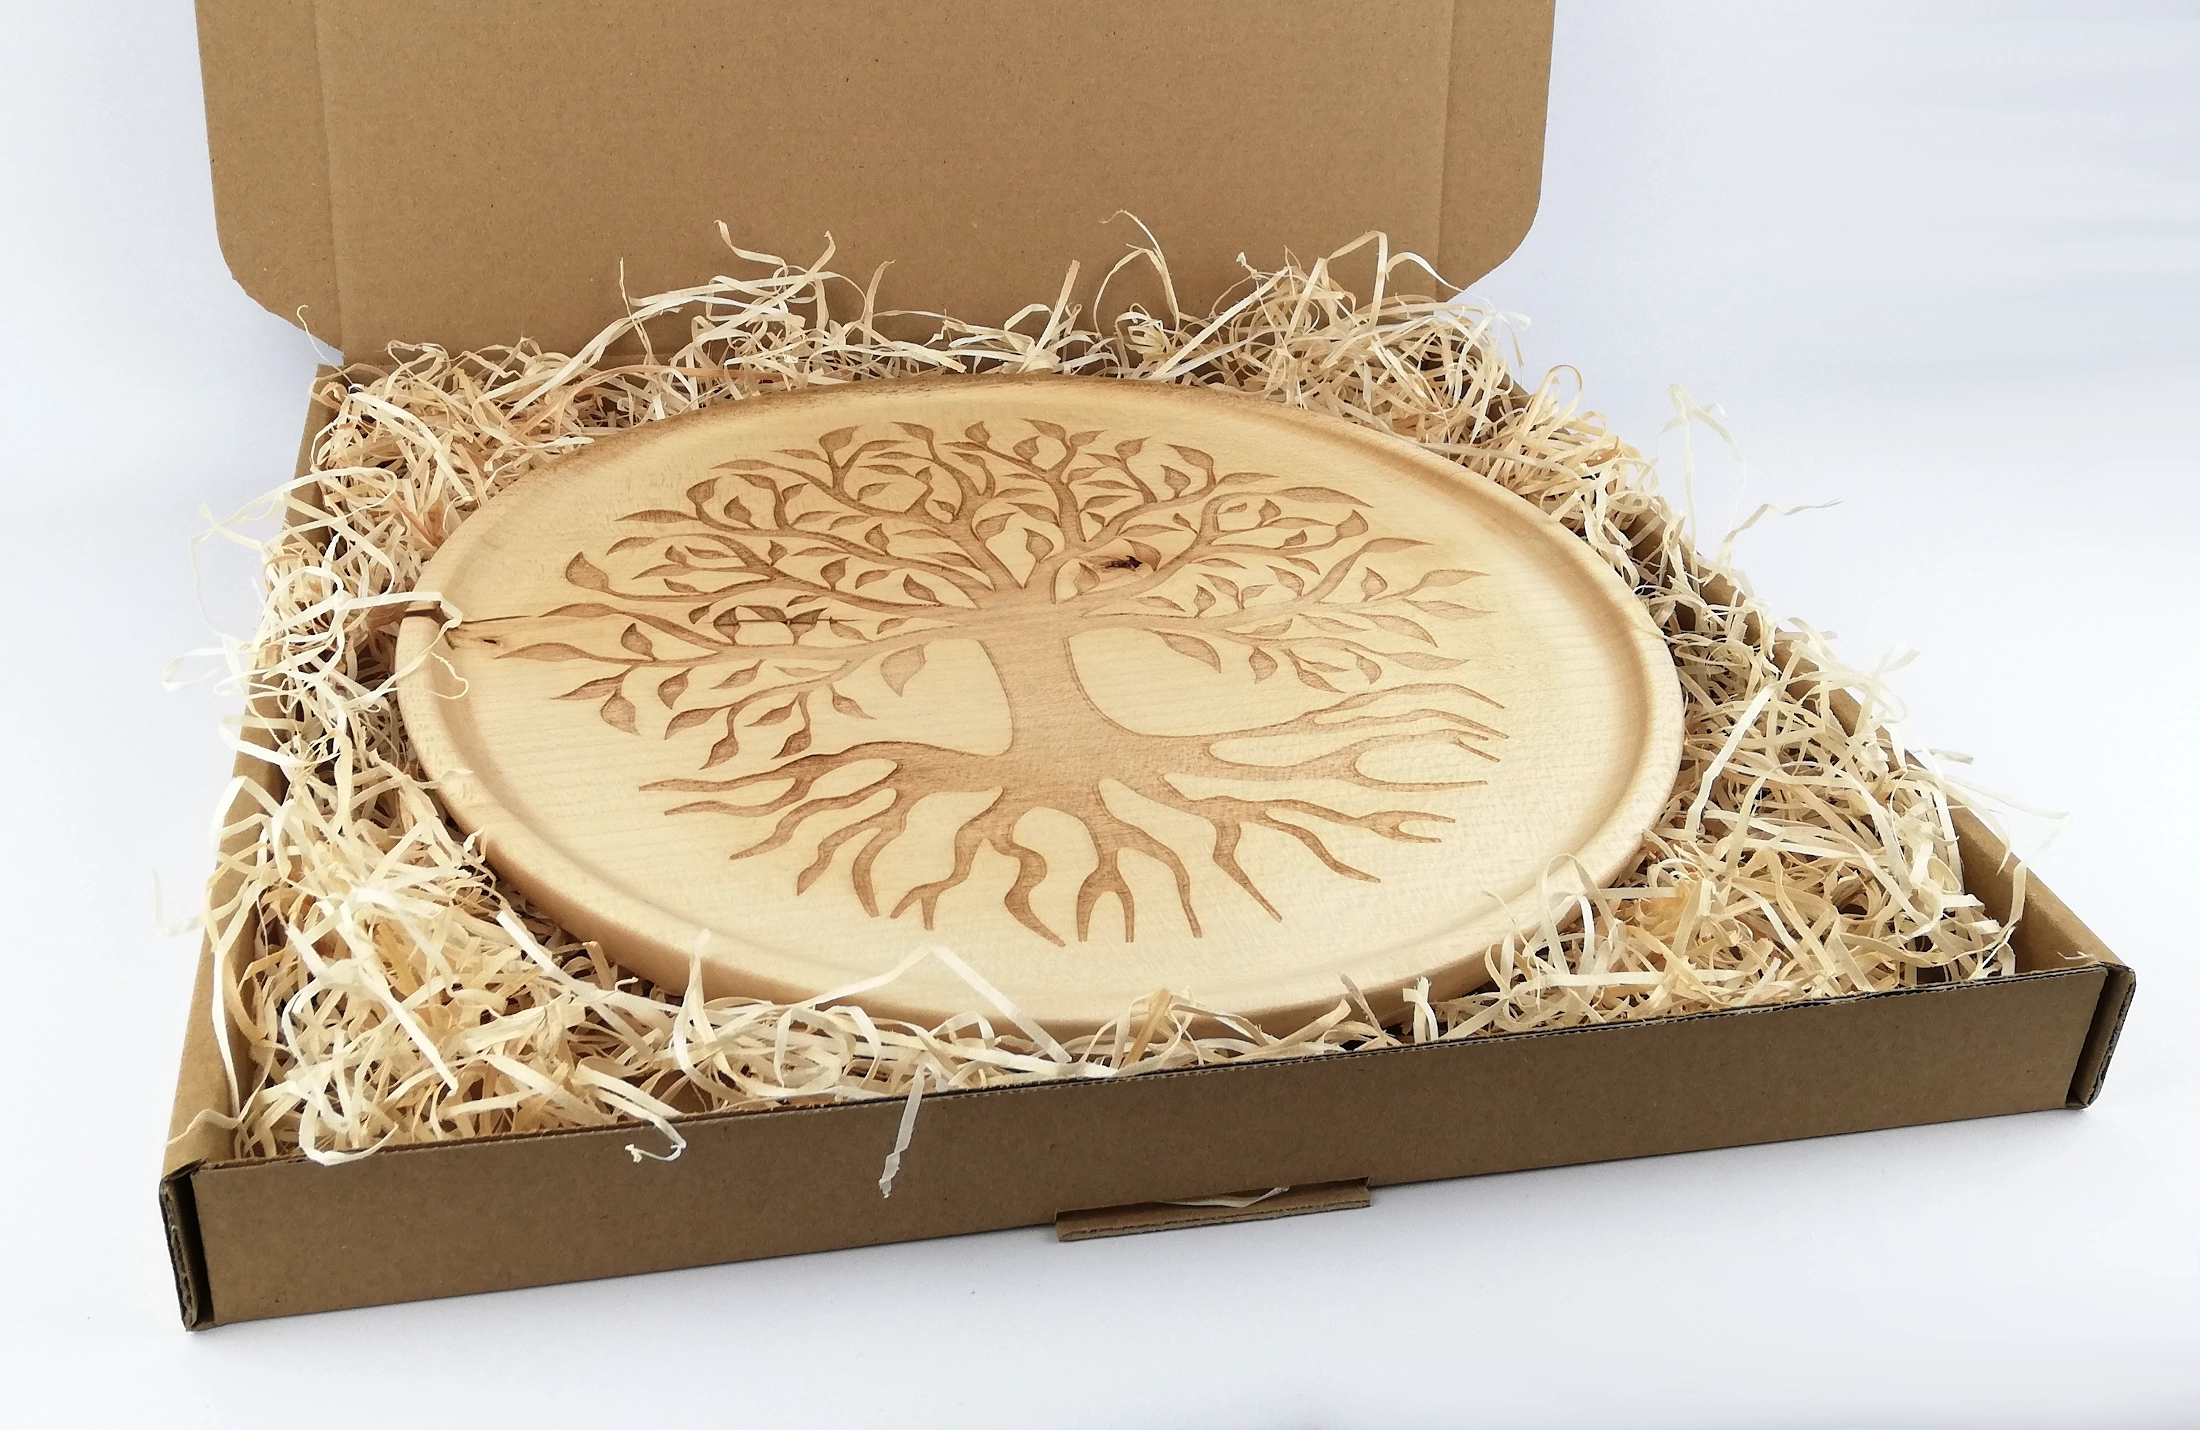 Tree of life (version 2) on a big plate (30cm/11.8in in diameter), packed in a box.